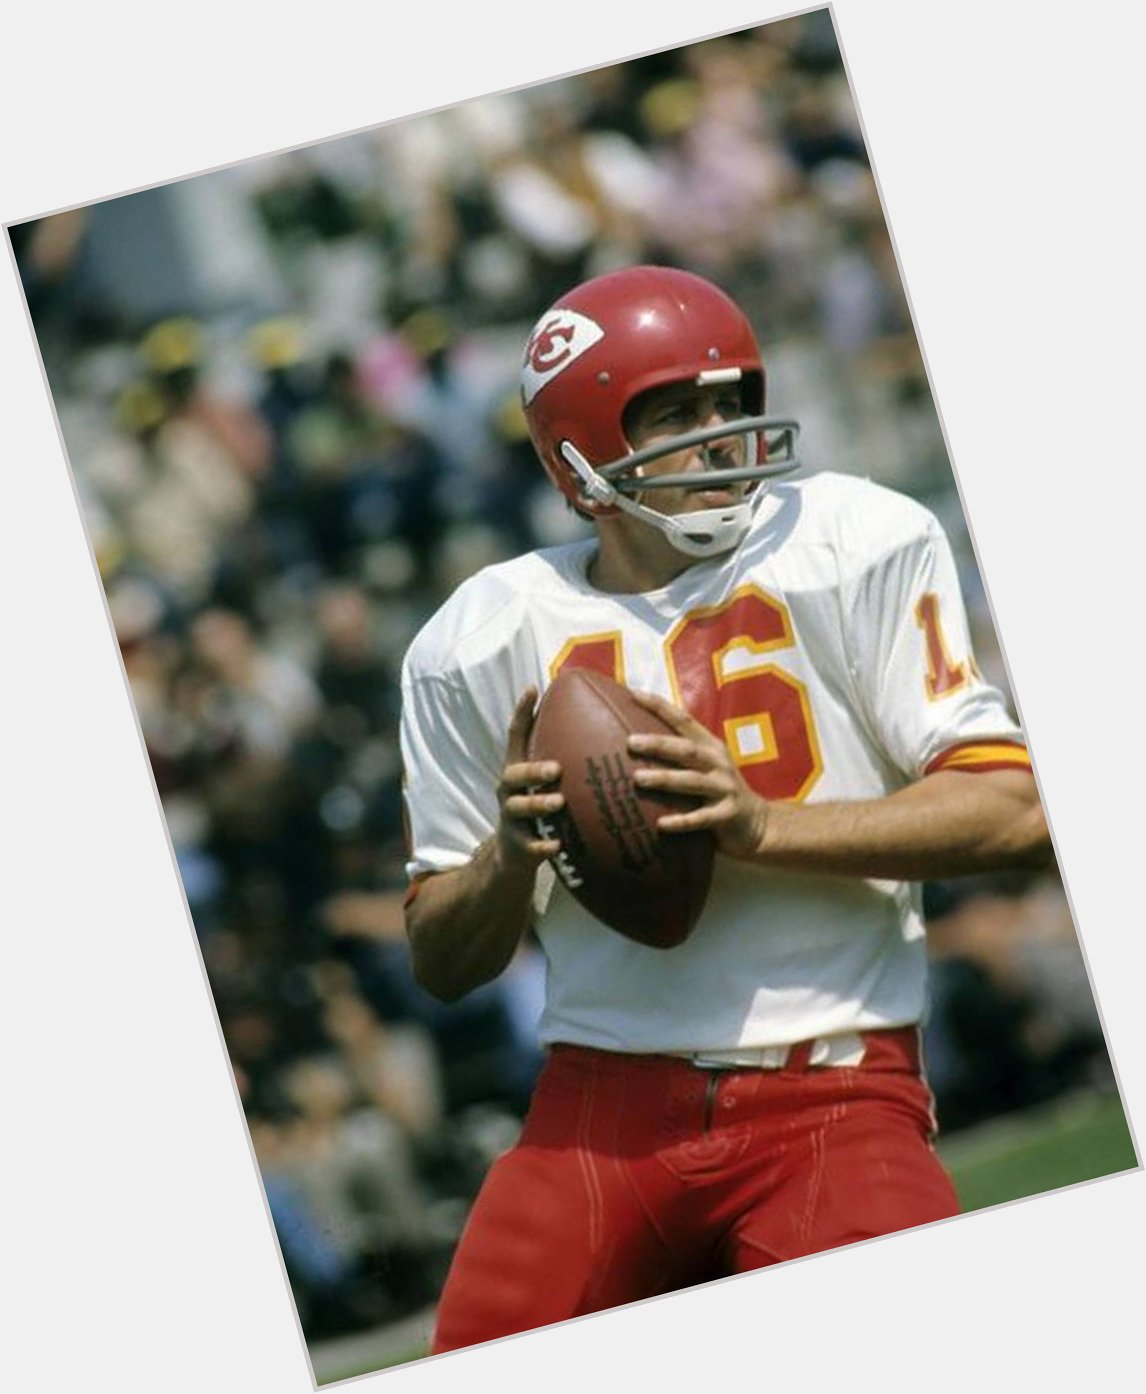 Happy 82nd Birthday to NFL Hall of Fame Quarterback and Super Bowl 4 Most Valuable Player, Len Dawson! 